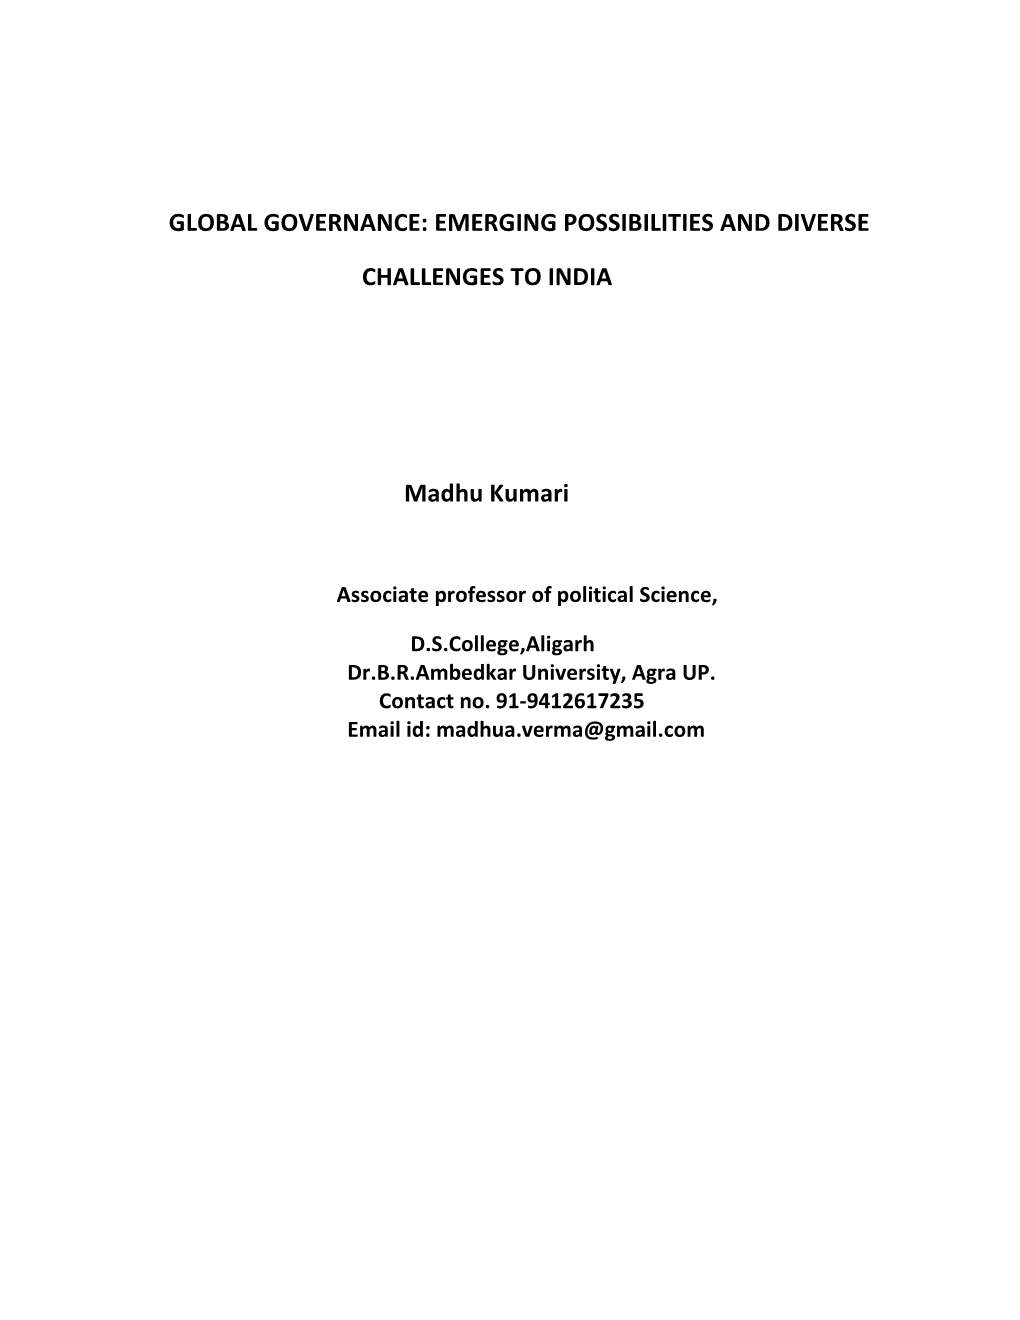 Global Governance: Emerging Possibilities and Diverse